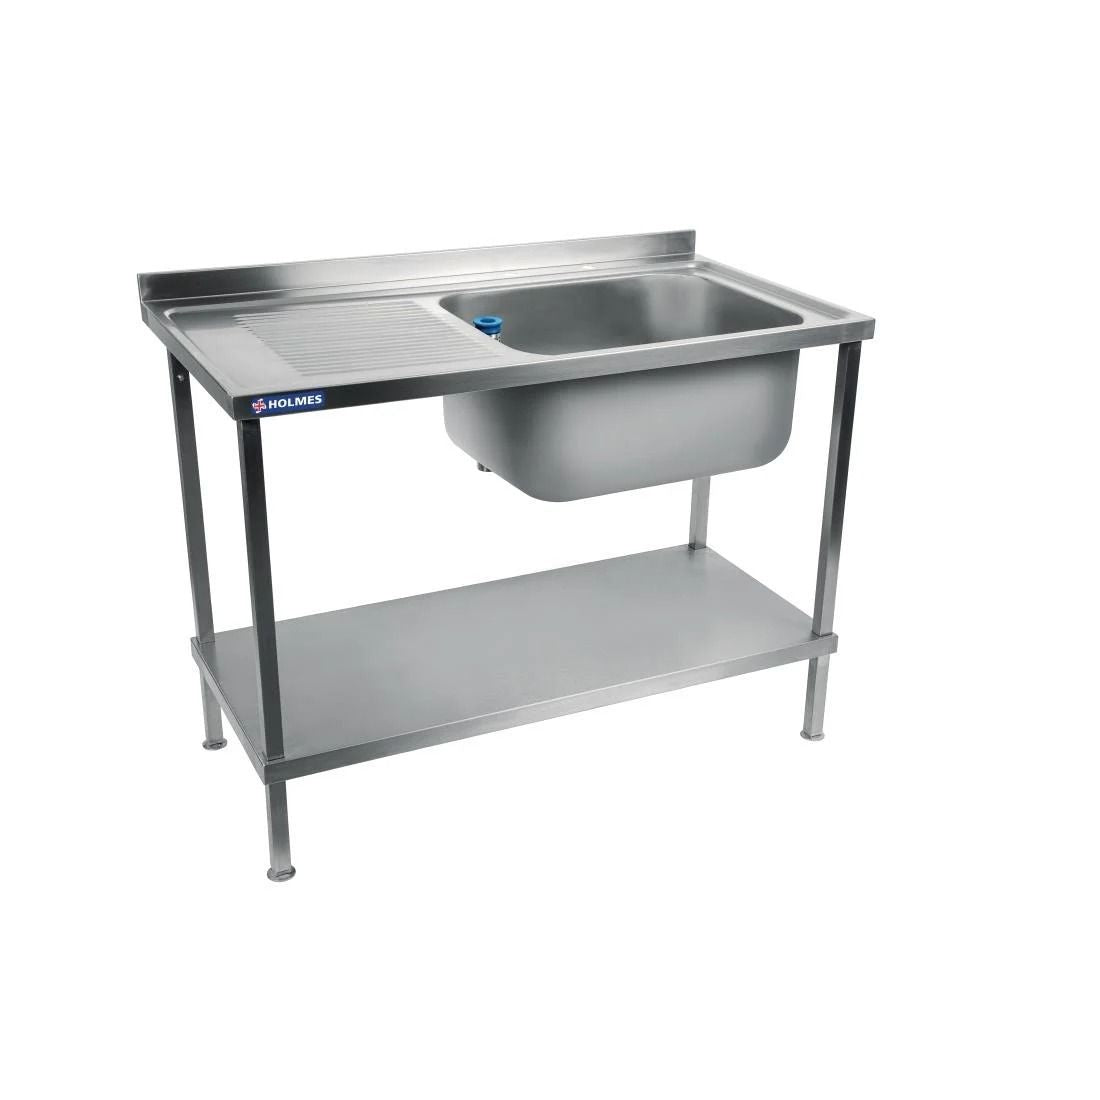 Holmes Self Assembly Stainless Steel Sink Left Hand Drainer 1200mm - DR363